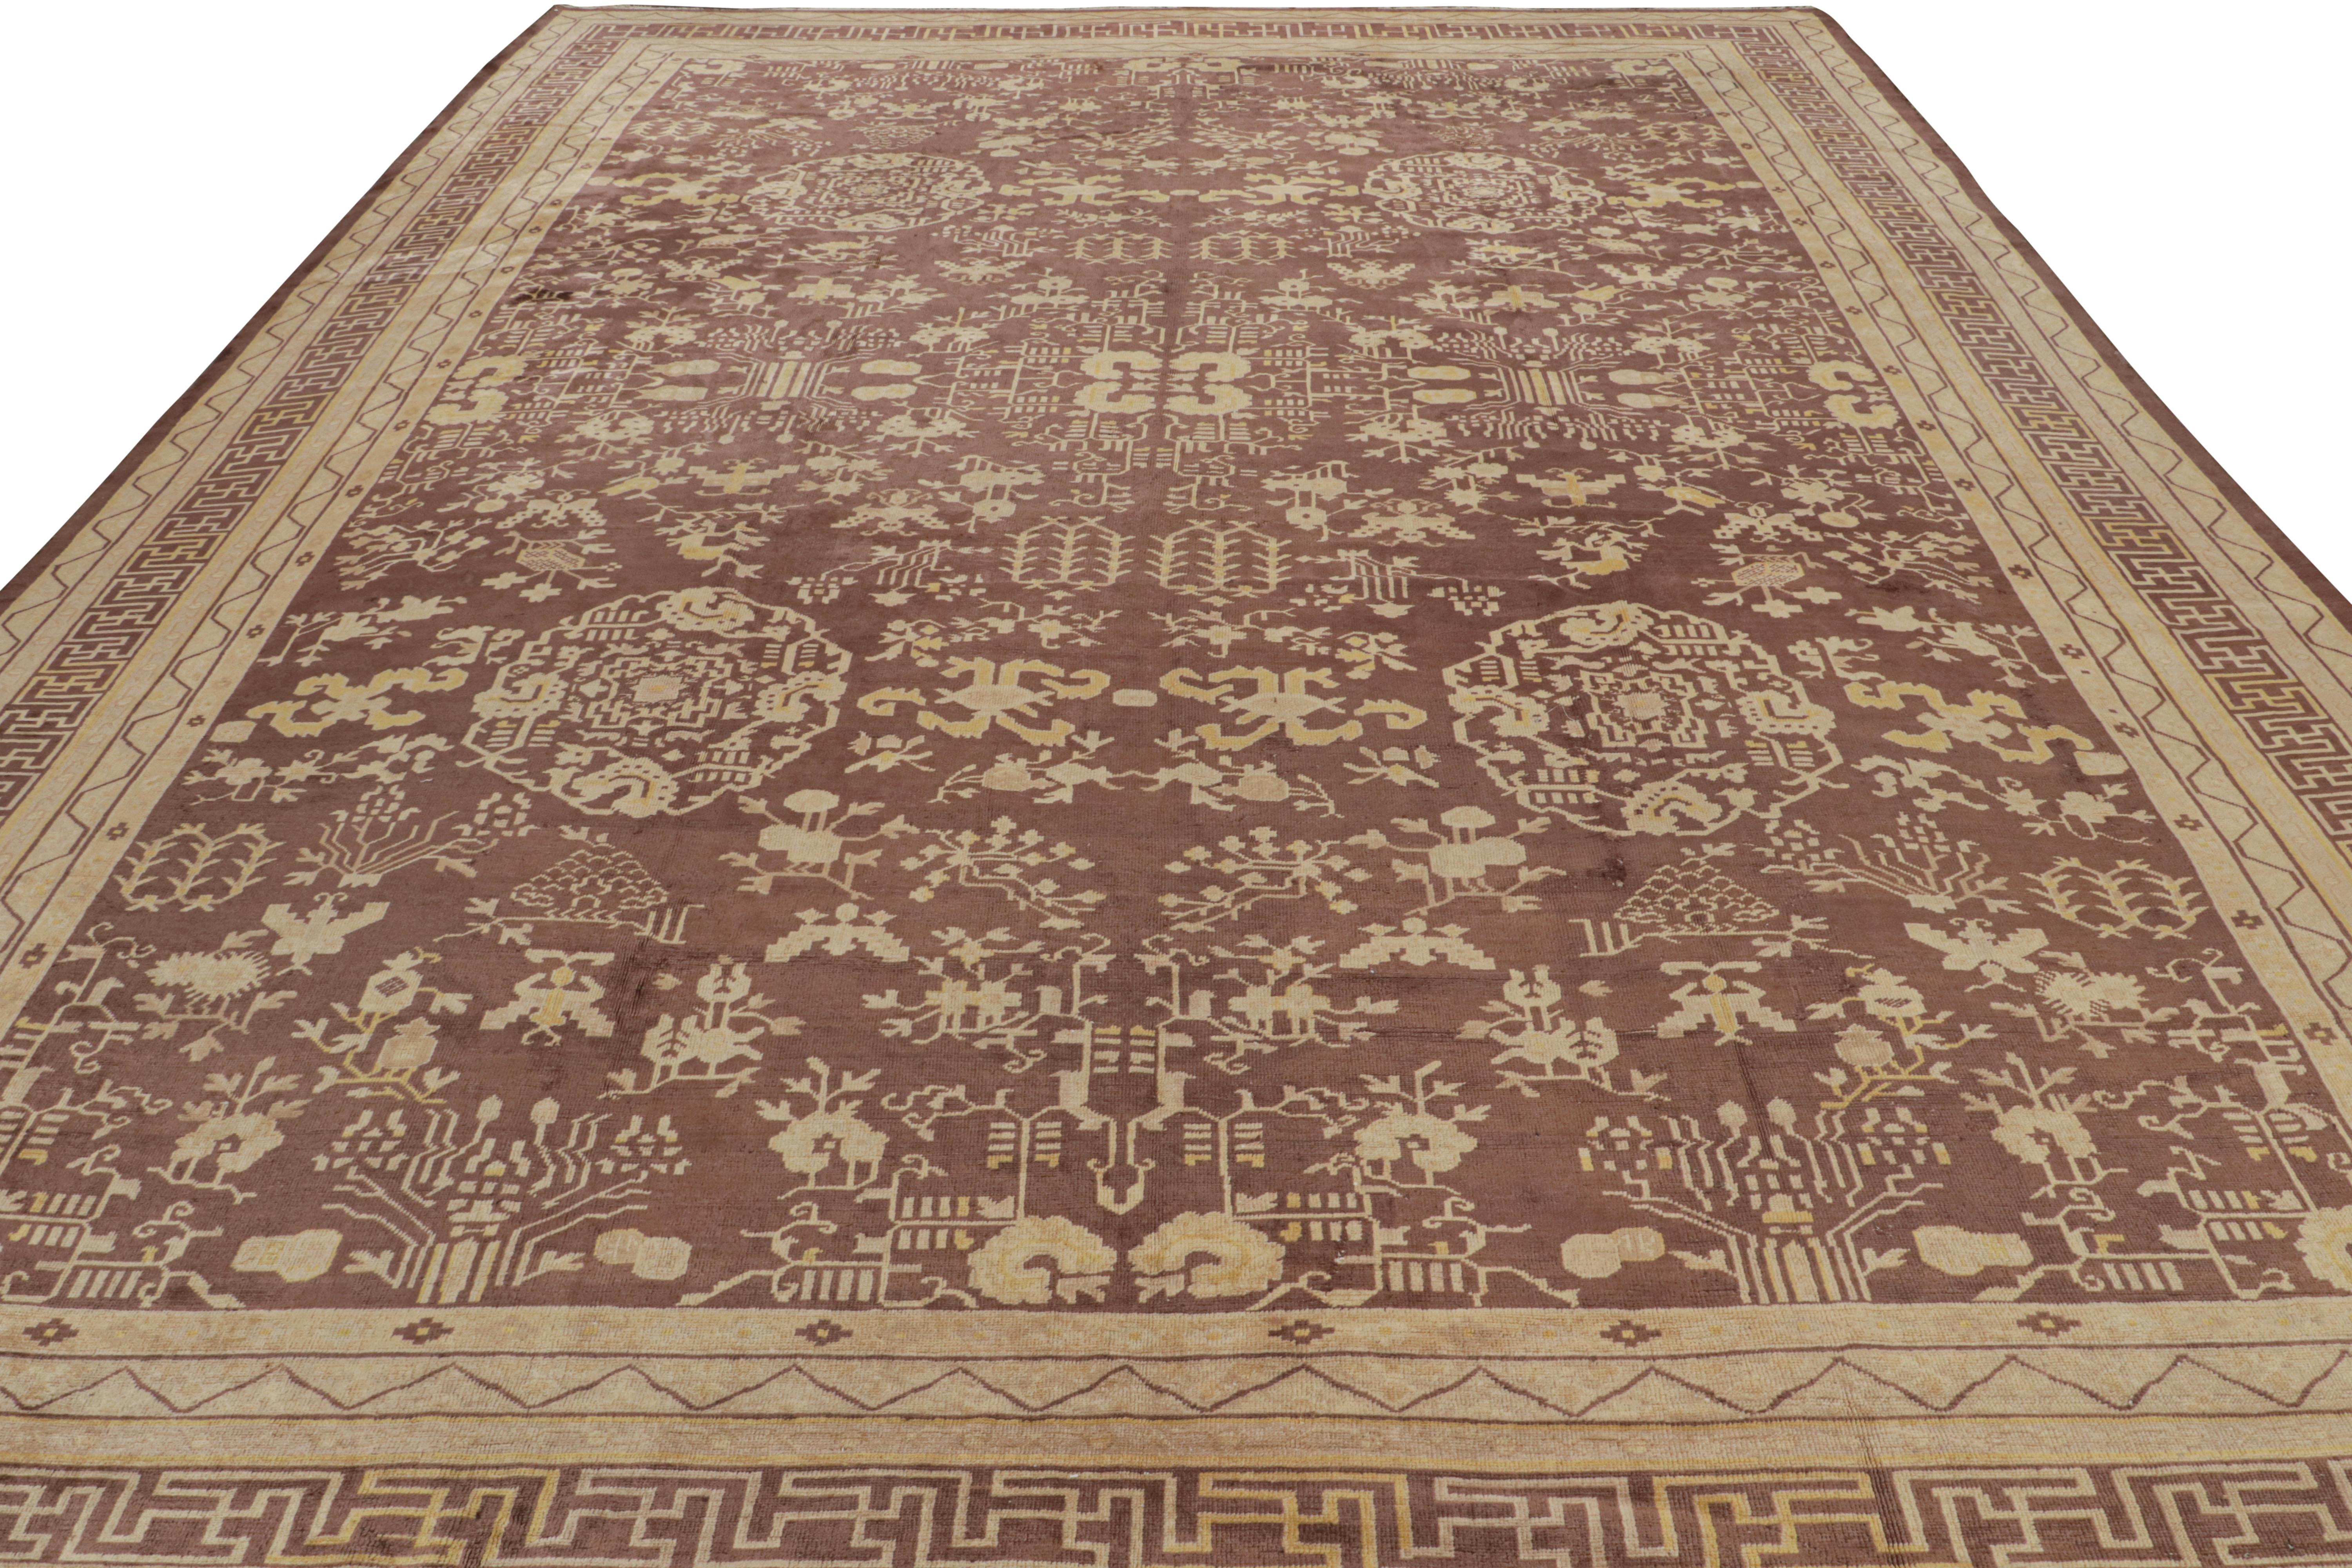 Hand-knotted in wool, an antique 12x16 Samarkand rug originating circa 1920-1930 - latest to join Rug & Kilim’s repertoire of antique curations.

On the Design:

This rug is one of the most rare works of its provenance we’ve seen as a few remain